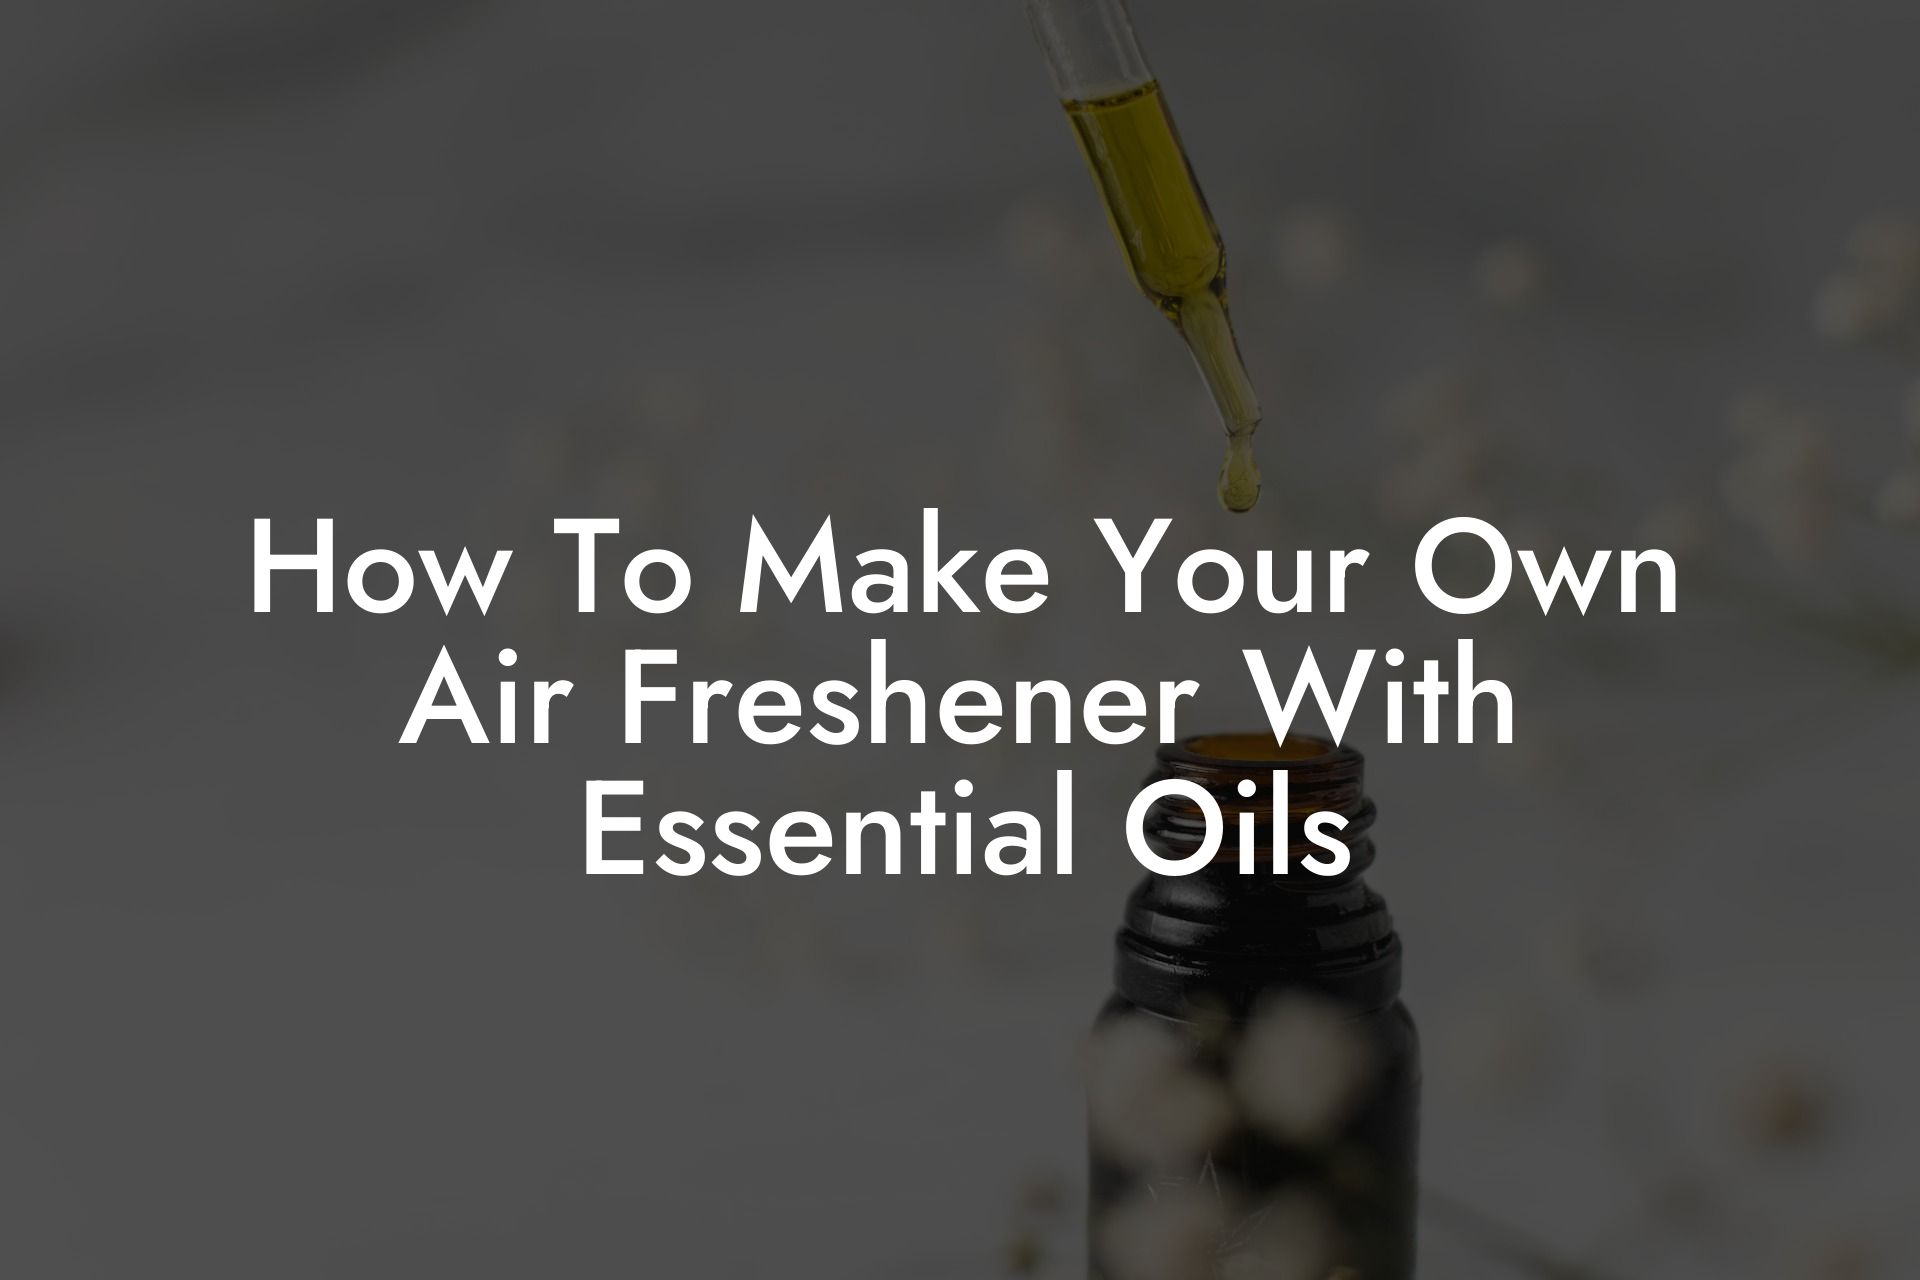 How To Make Your Own Air Freshener With Essential Oils